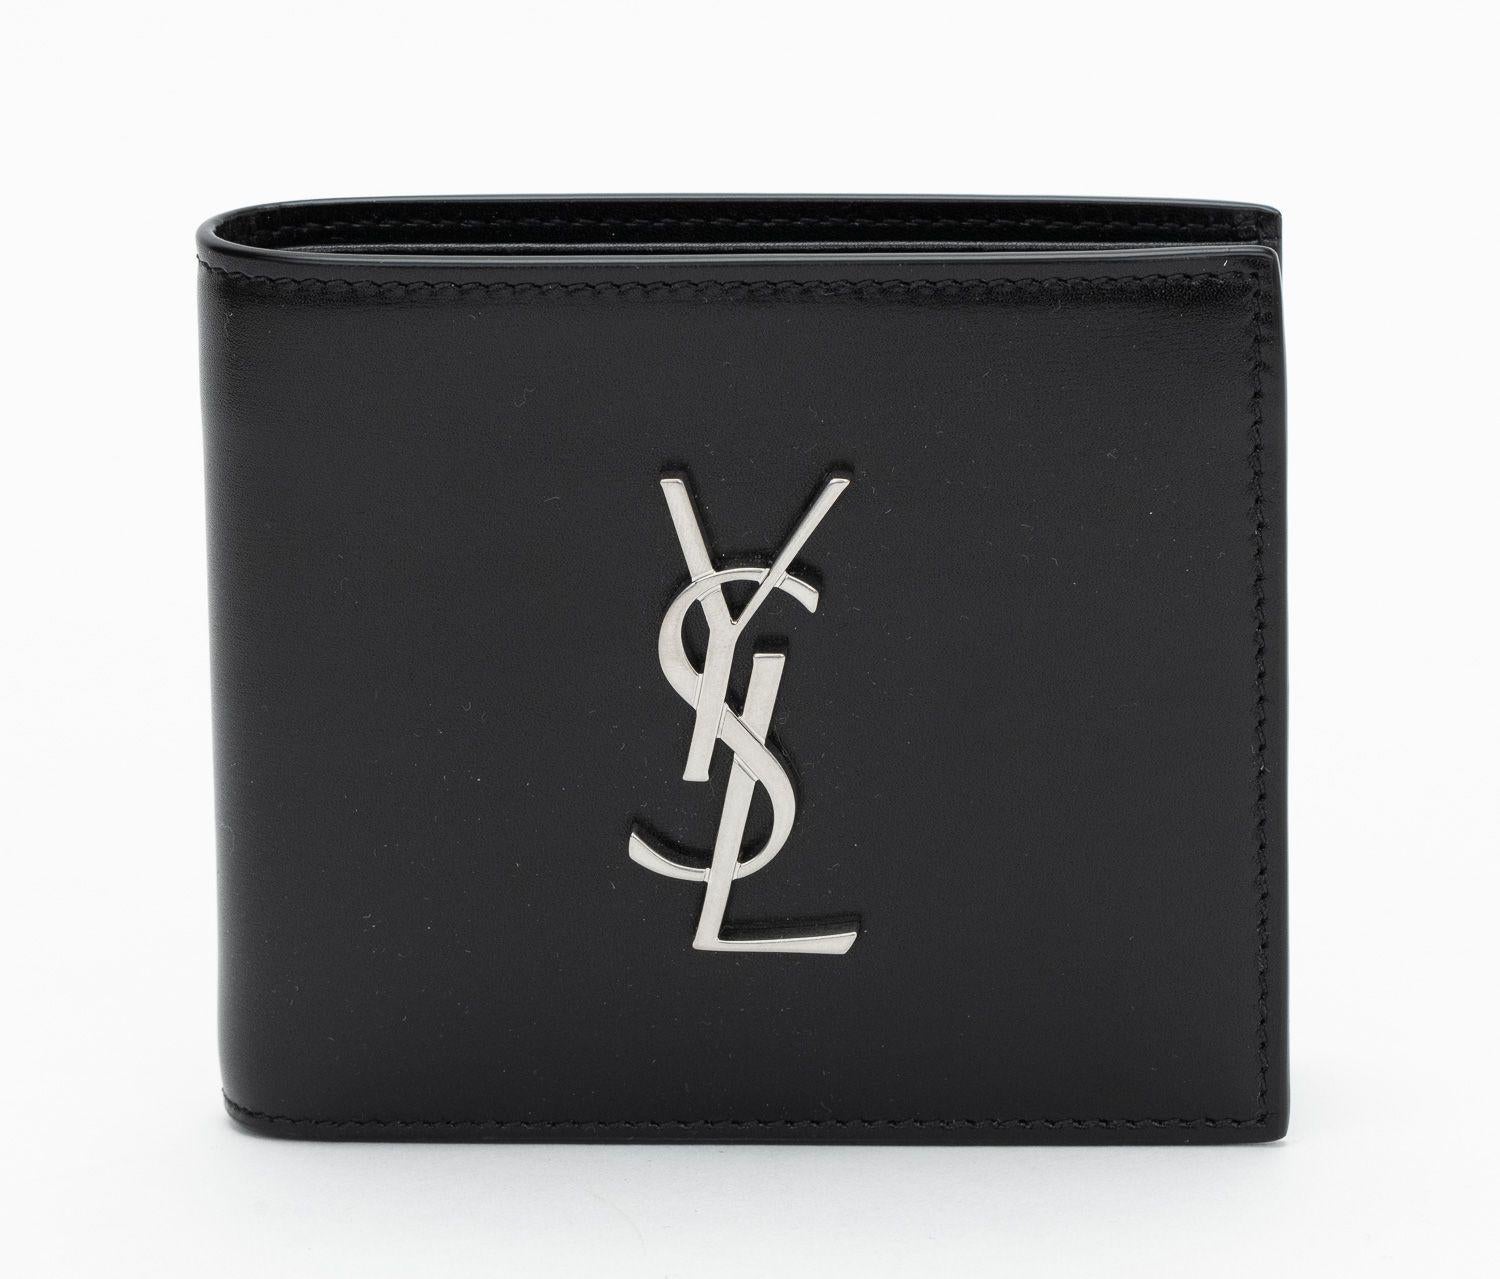 YSL New Black leather bifold wallet with palladium metal YSL logo on the front.
10 card slots and two compartments inside.
Comes with booklet, original dust cover and original box.